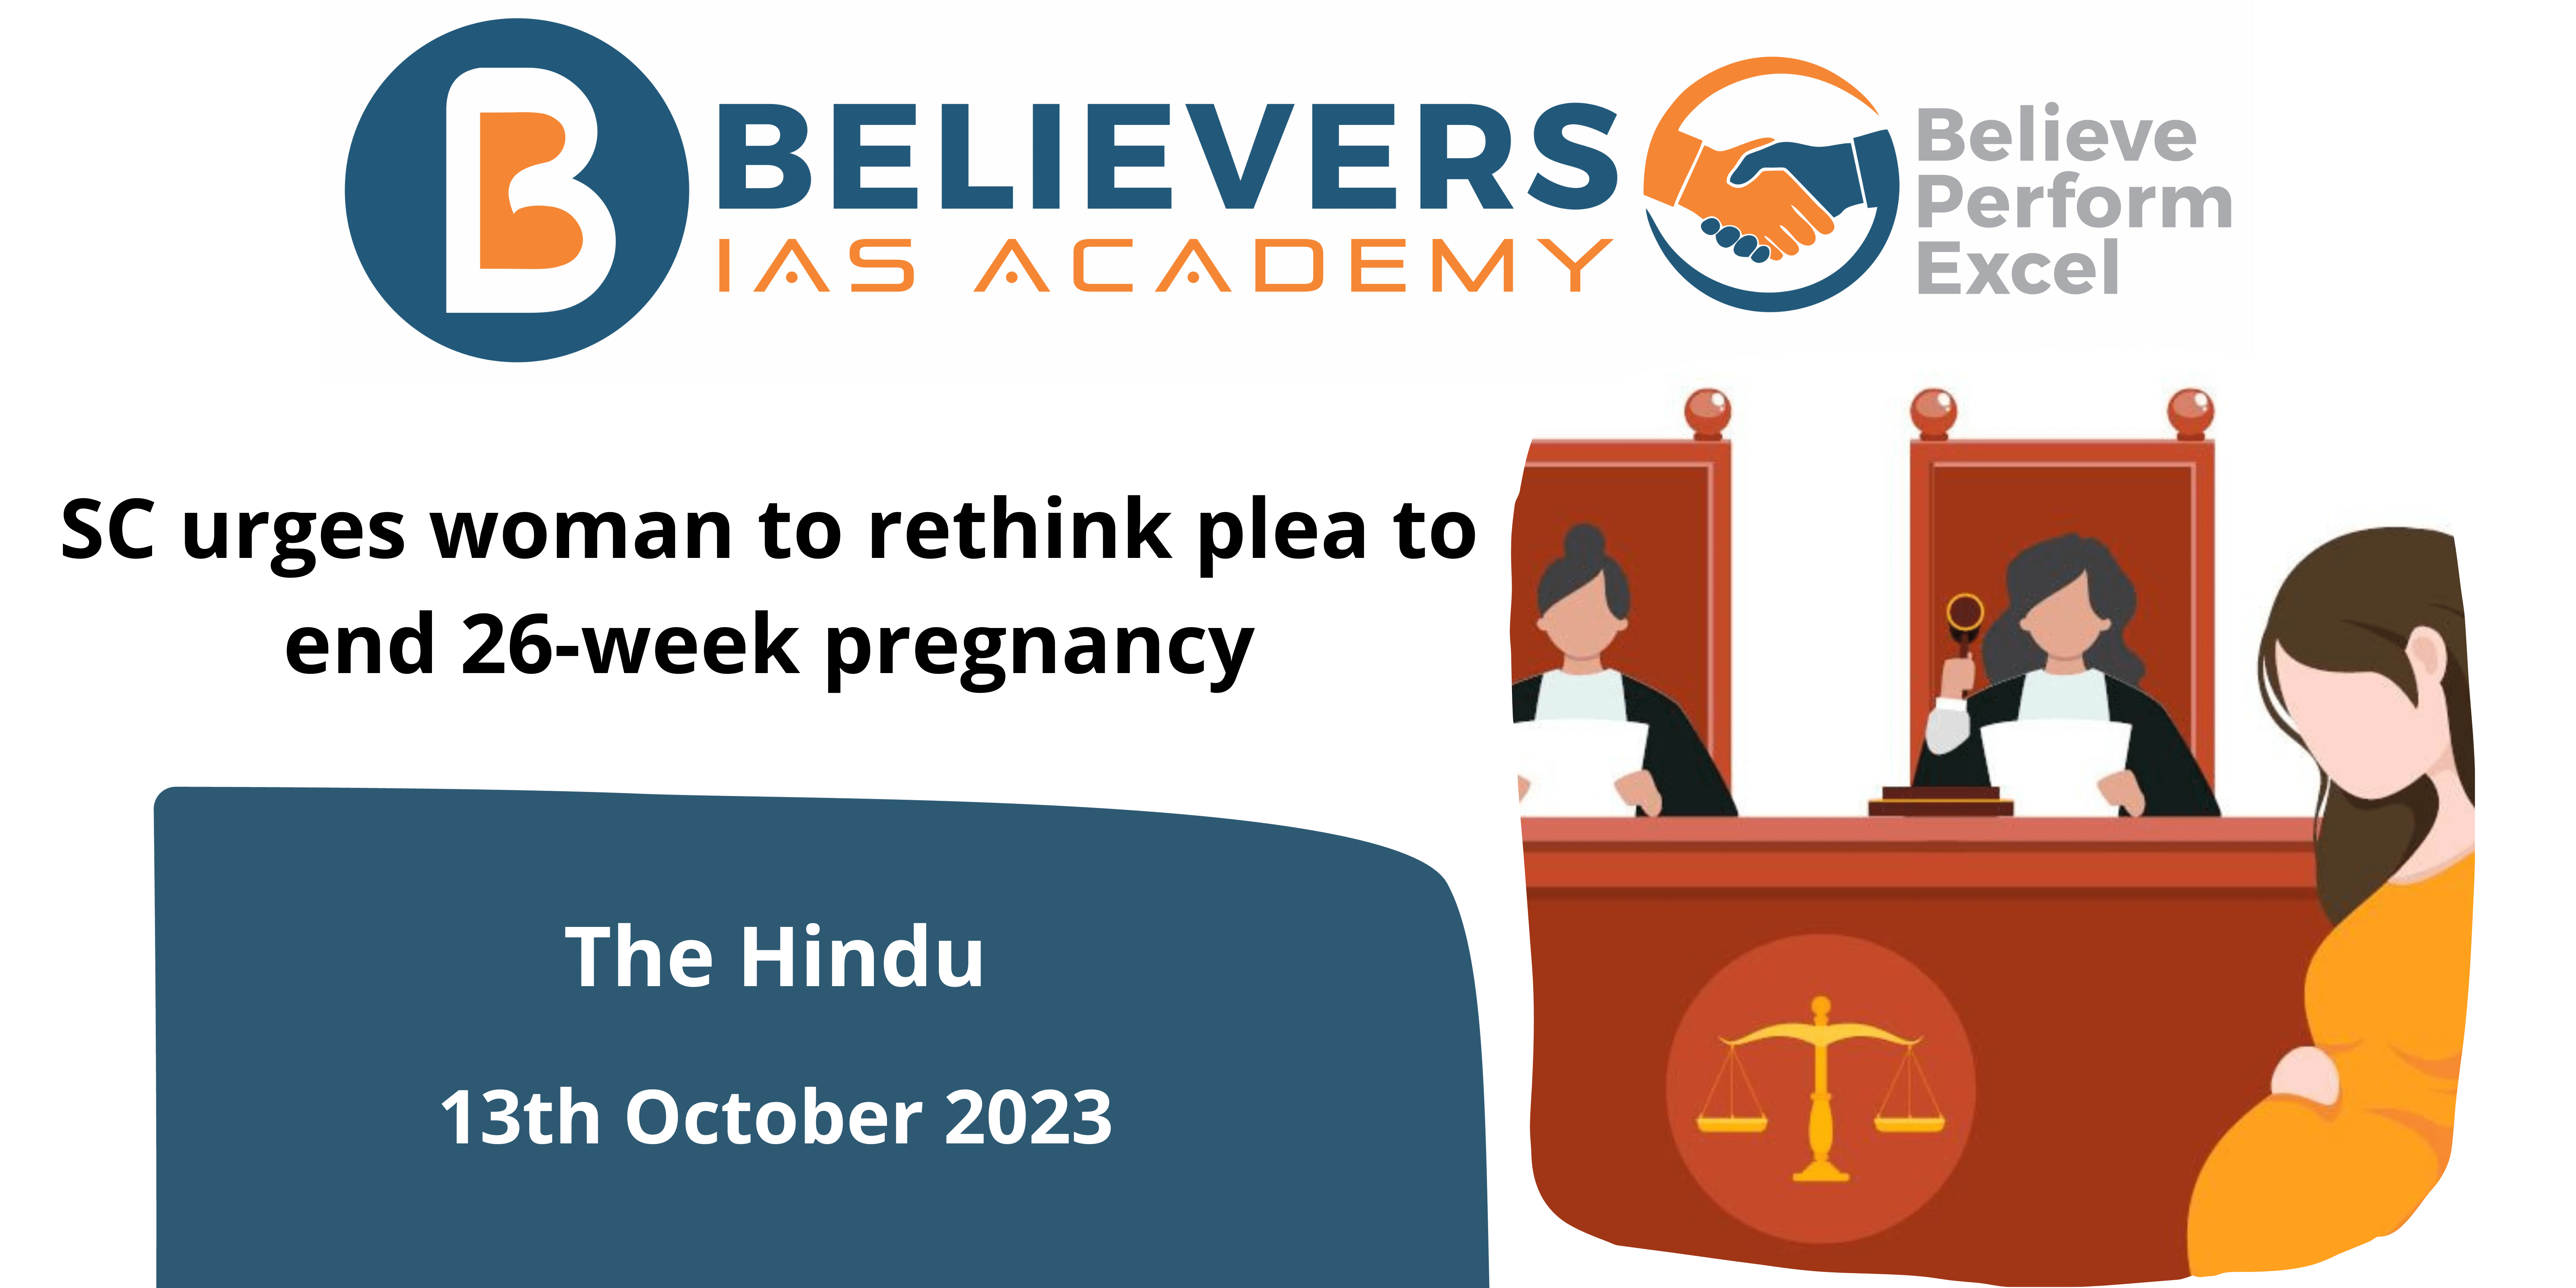 SC urges woman to rethink plea to end 26-week pregnancy